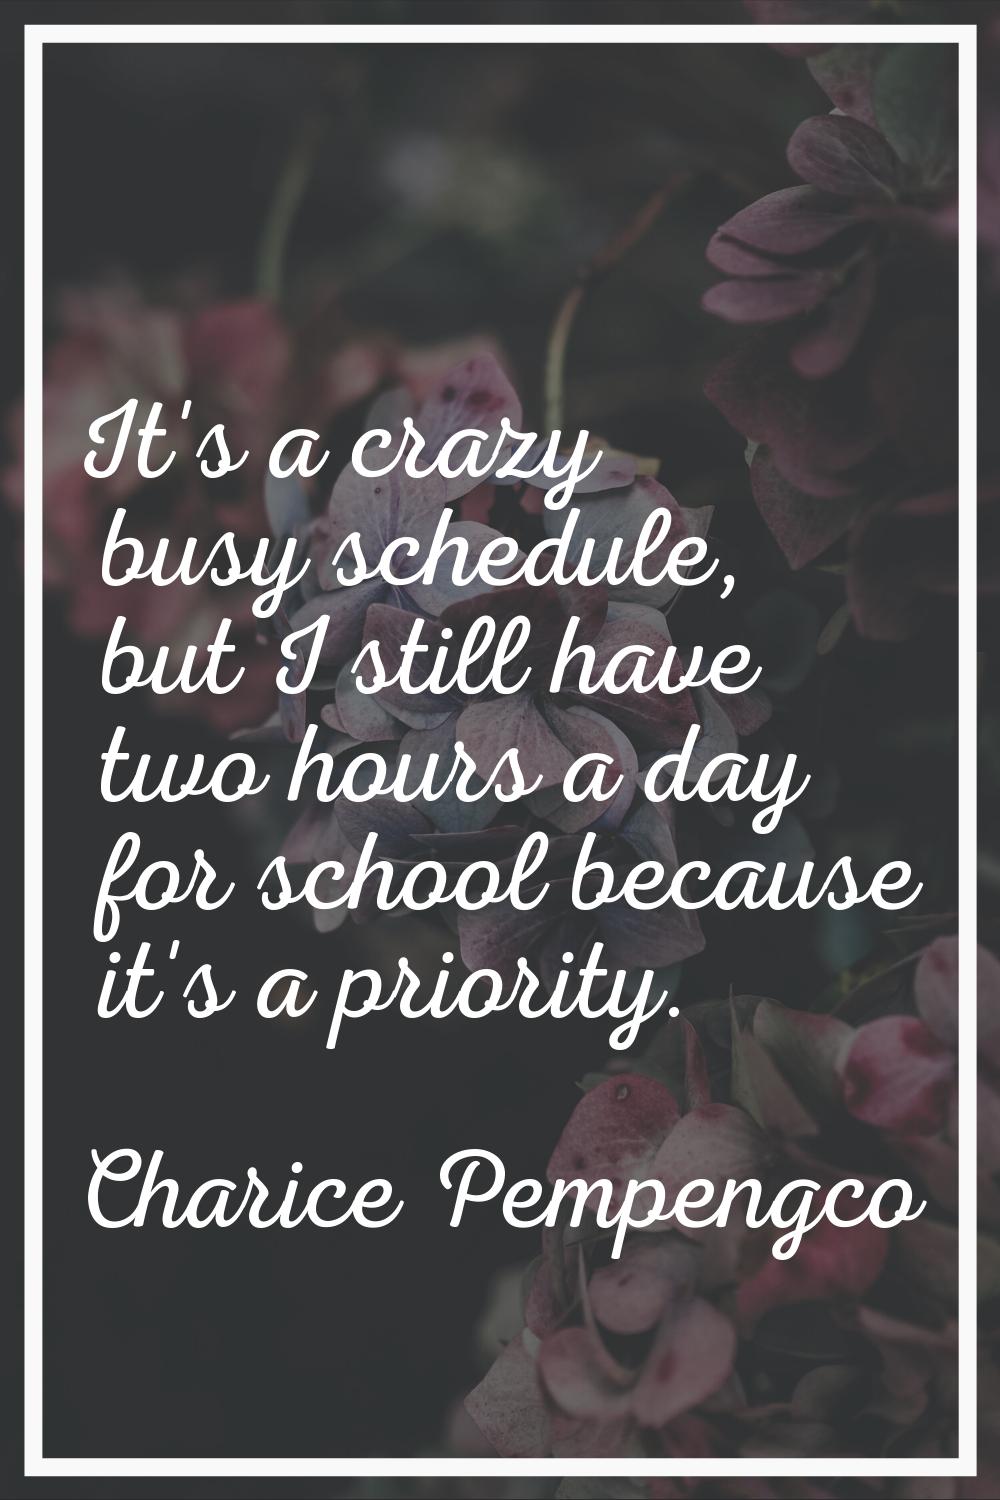 It's a crazy busy schedule, but I still have two hours a day for school because it's a priority.